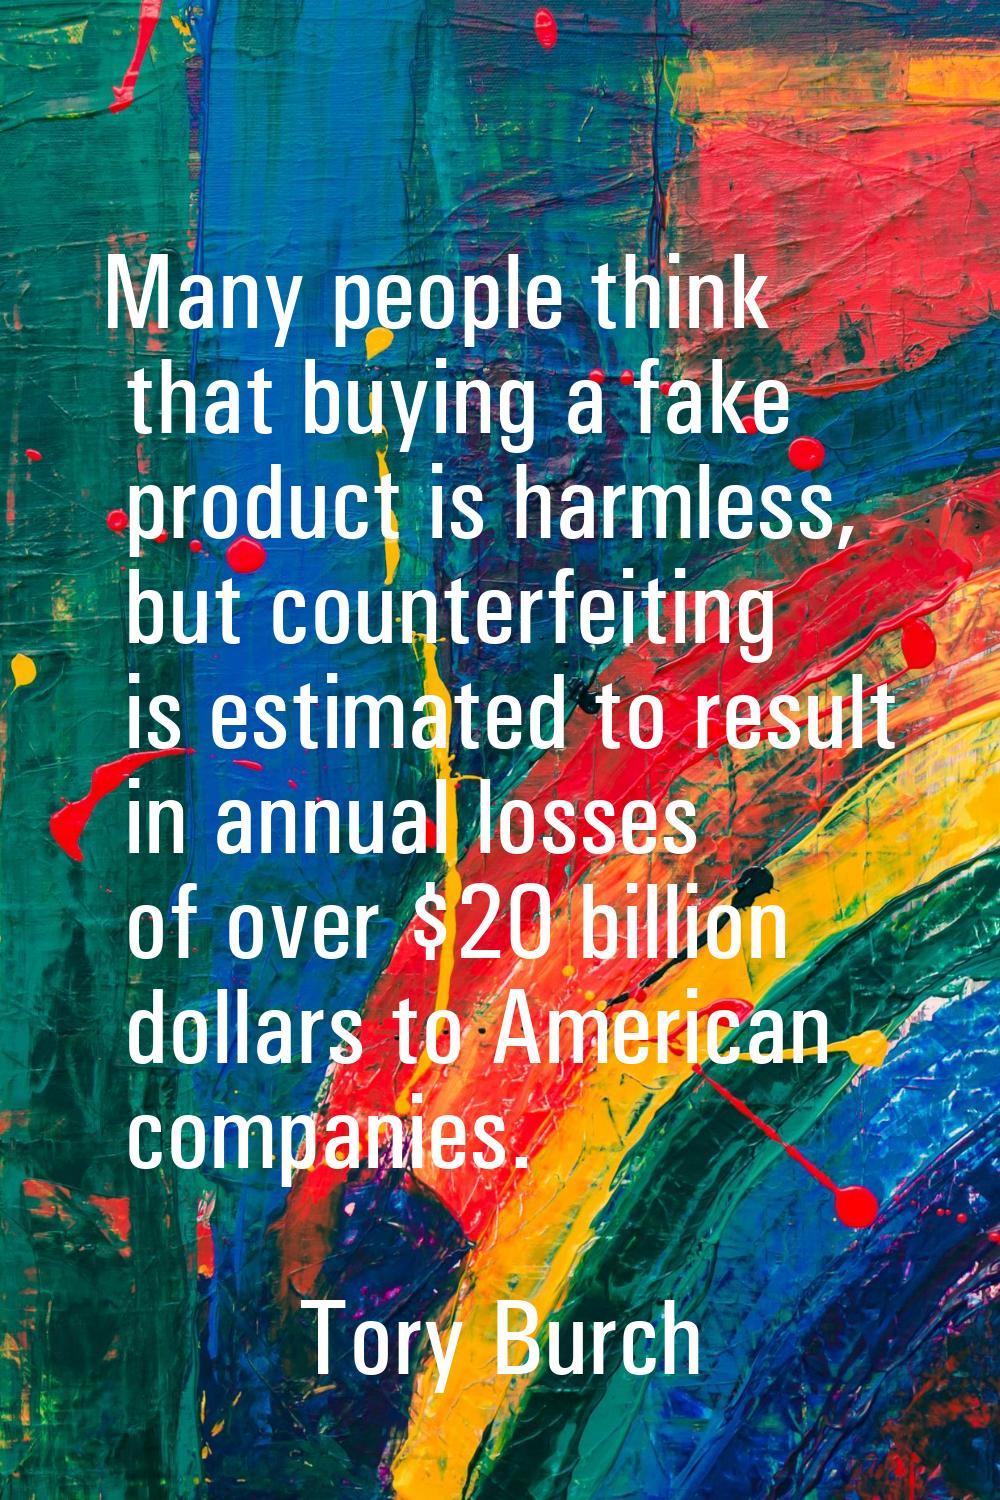 Many people think that buying a fake product is harmless, but counterfeiting is estimated to result